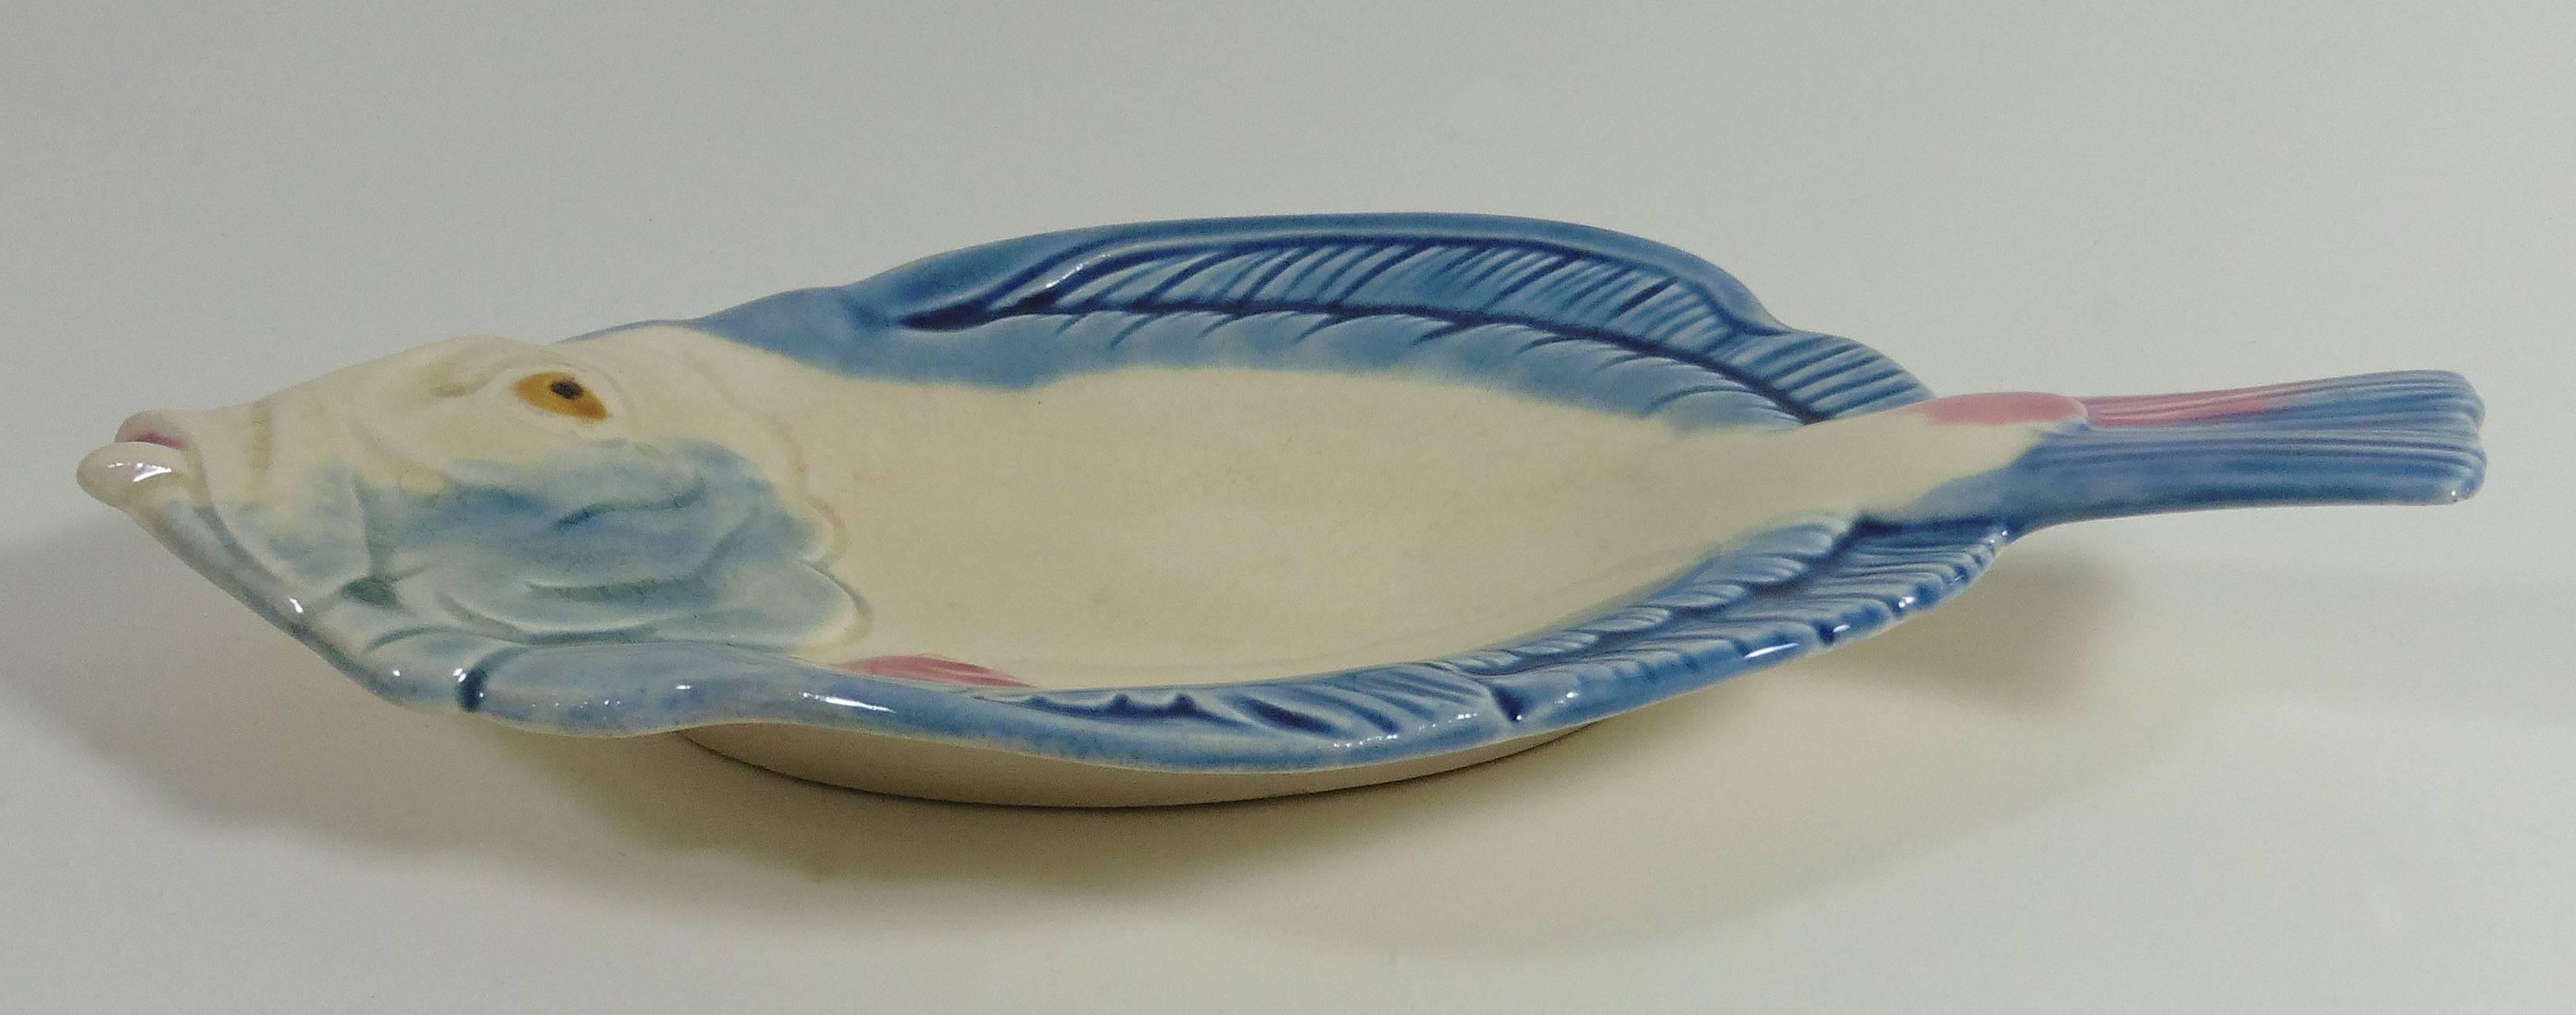 Large Majolica smooth oreo or smooth dory platter signed Hippolyte Boulenger, circa 1890.Usually found on small size.
